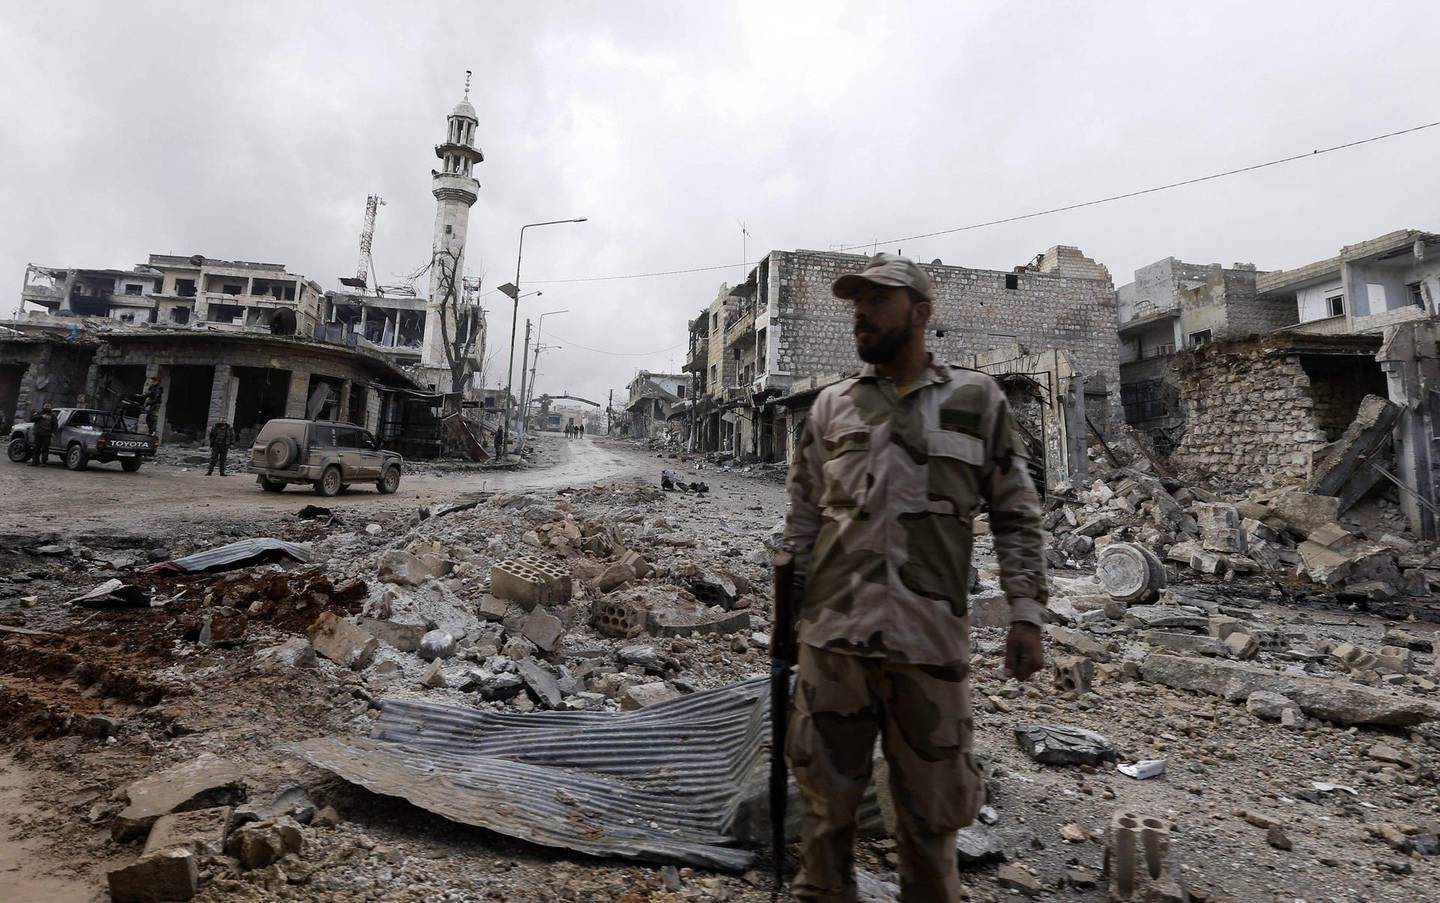 A picture taken during a guided tour organised by the Syrian ministry of information, shows a pro-regime fighter standing in the midst of rubble and buildings damaged by deadly regime and Russian air strikes, in the town of Maaret al-Numan, in the northwestern Idlib province, on January 30, 2020. Syrian government forces recaptured the strategic northwestern highway town of Maaret al-Numan from jihadist and allied rebels on January 28, in the latest blow to the country's last major opposition bastion.
 / AFP / LOUAI BESHARA
